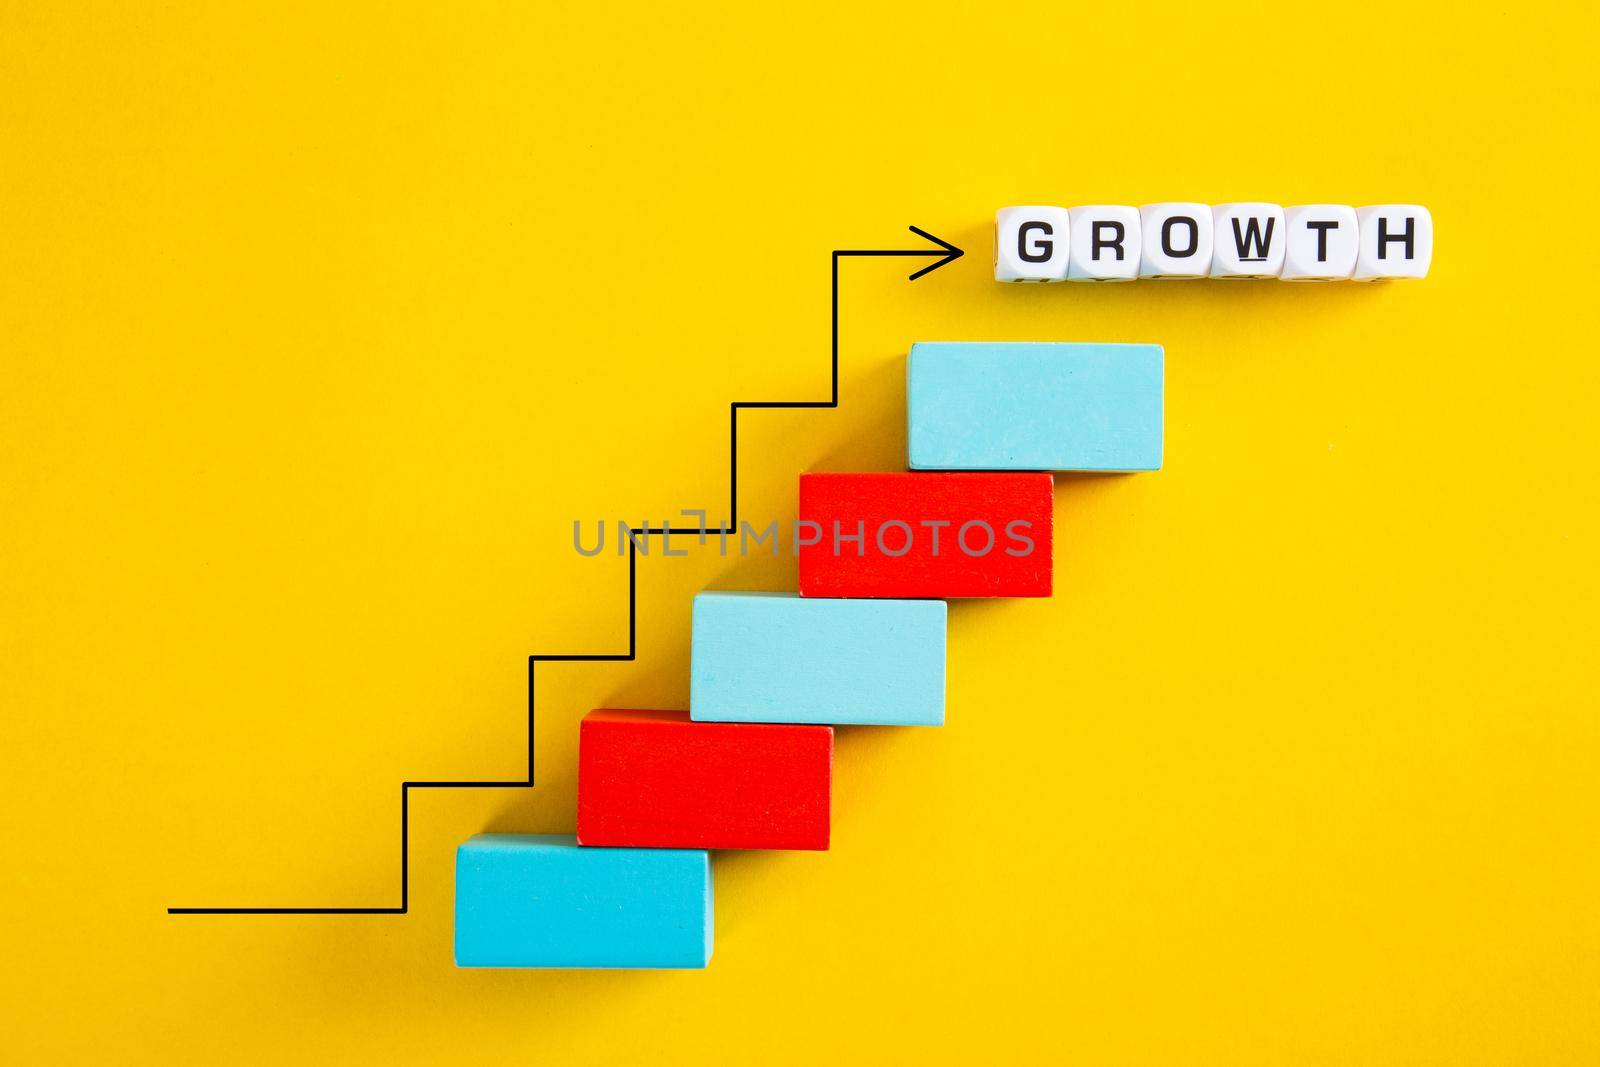 Upward pointing arrow on top of growing graph made of wooden blocks over yellow background by tehcheesiong